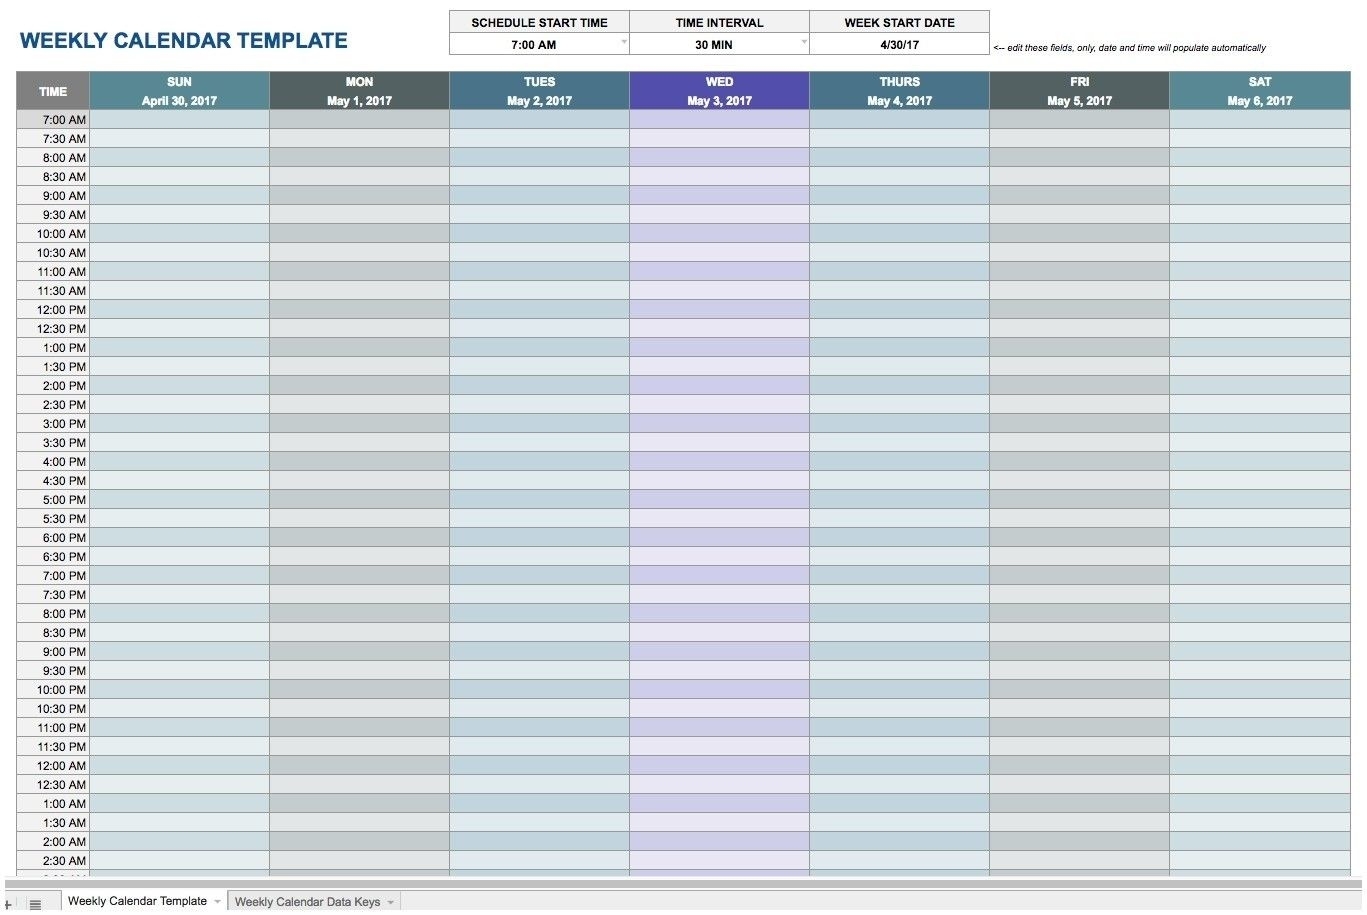 Daily Calendar Template Excel Appointment Schedule Template 30 Minute Increment Schedule Template Excel